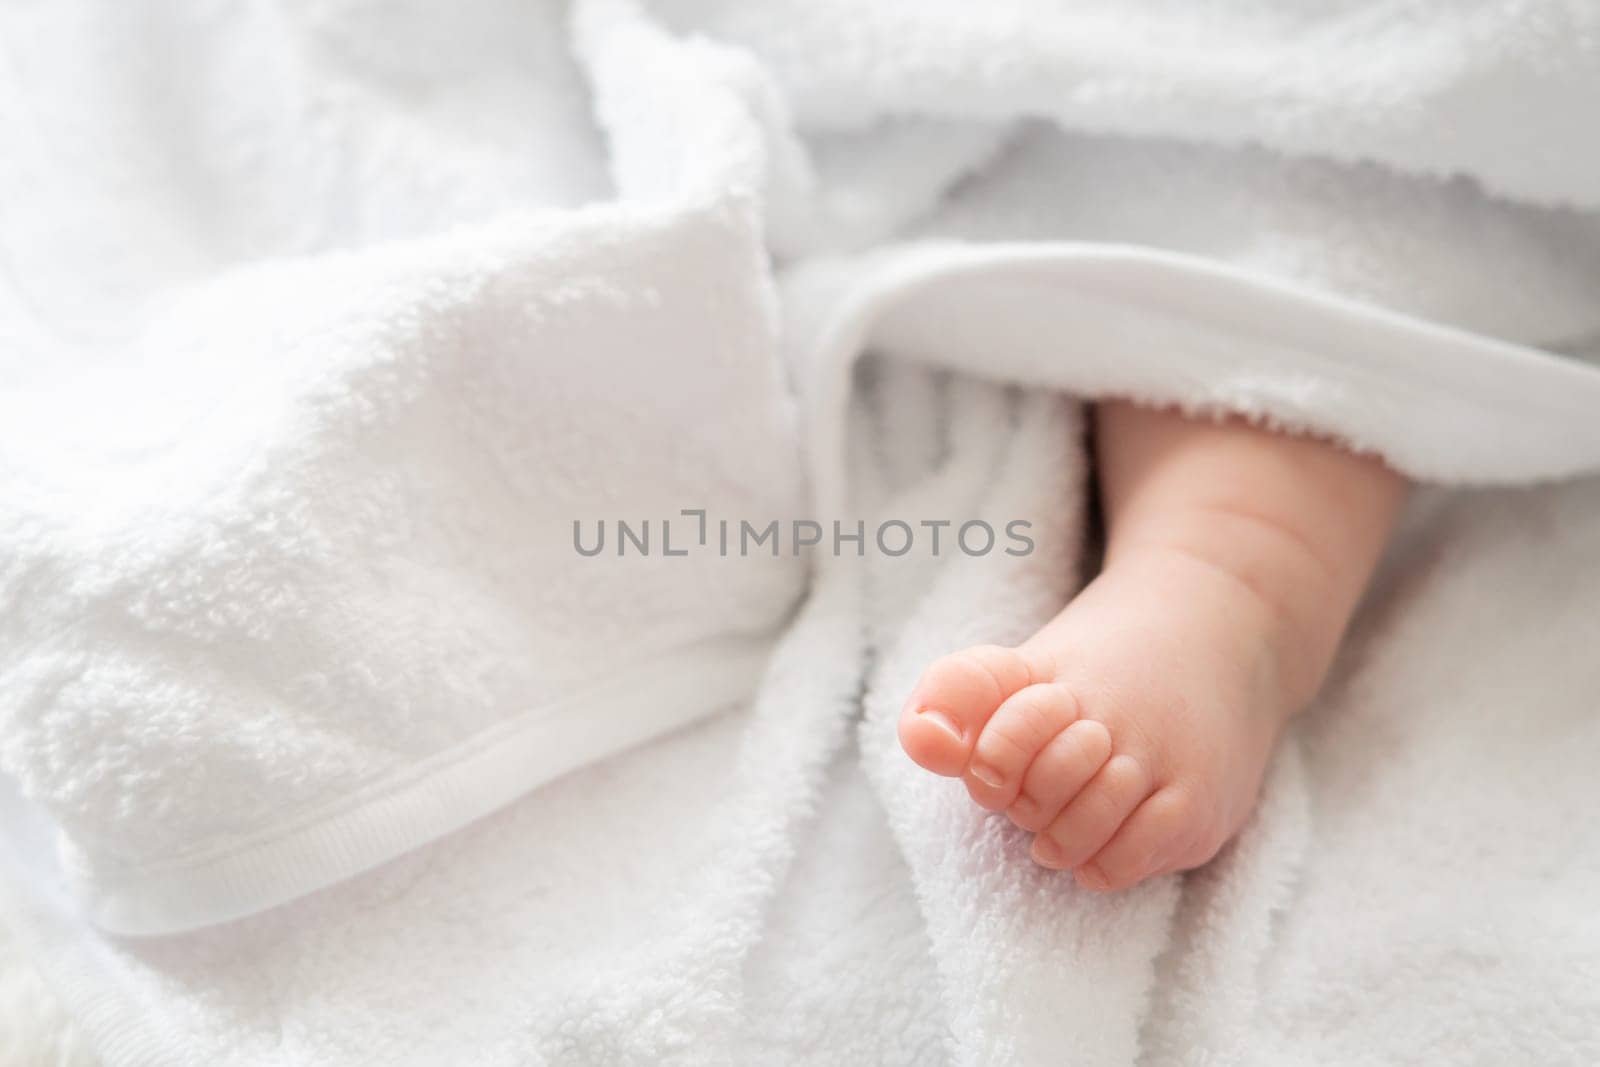 A beautiful moment captured as a newborn's foot shyly makes its presence known from underneath a soft white towel